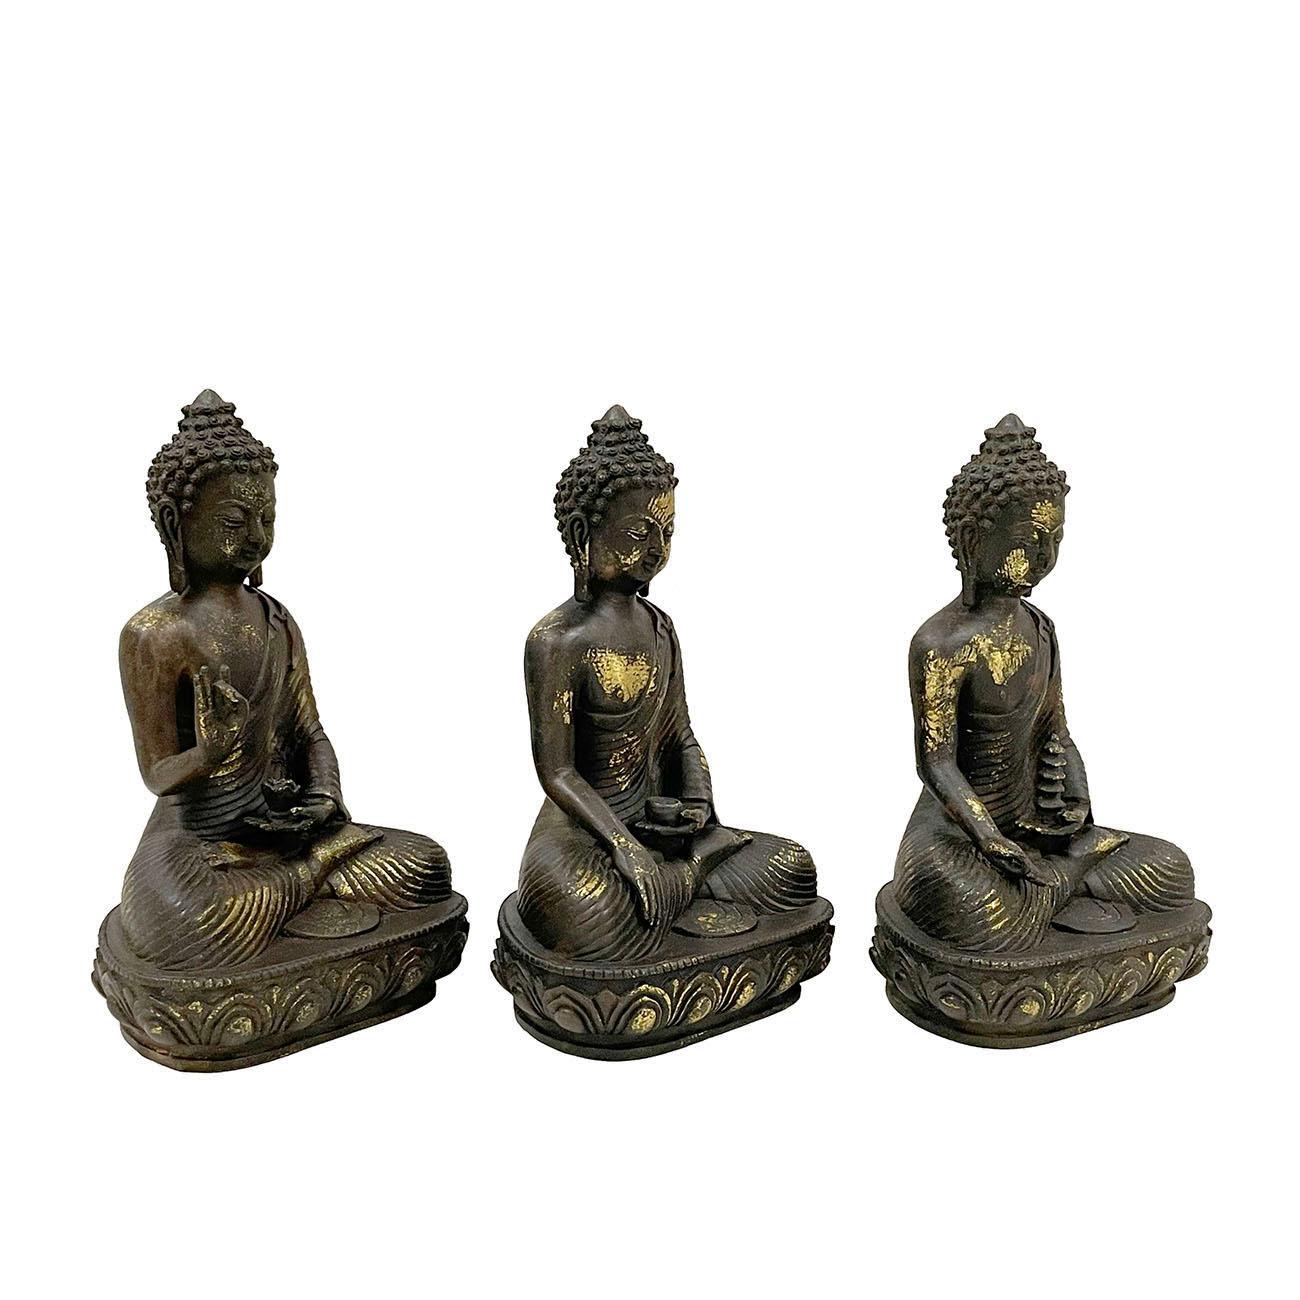 Chinese Export Early 20 Century Antique Carved Bronze 3 Generations of Buddha Statues For Sale